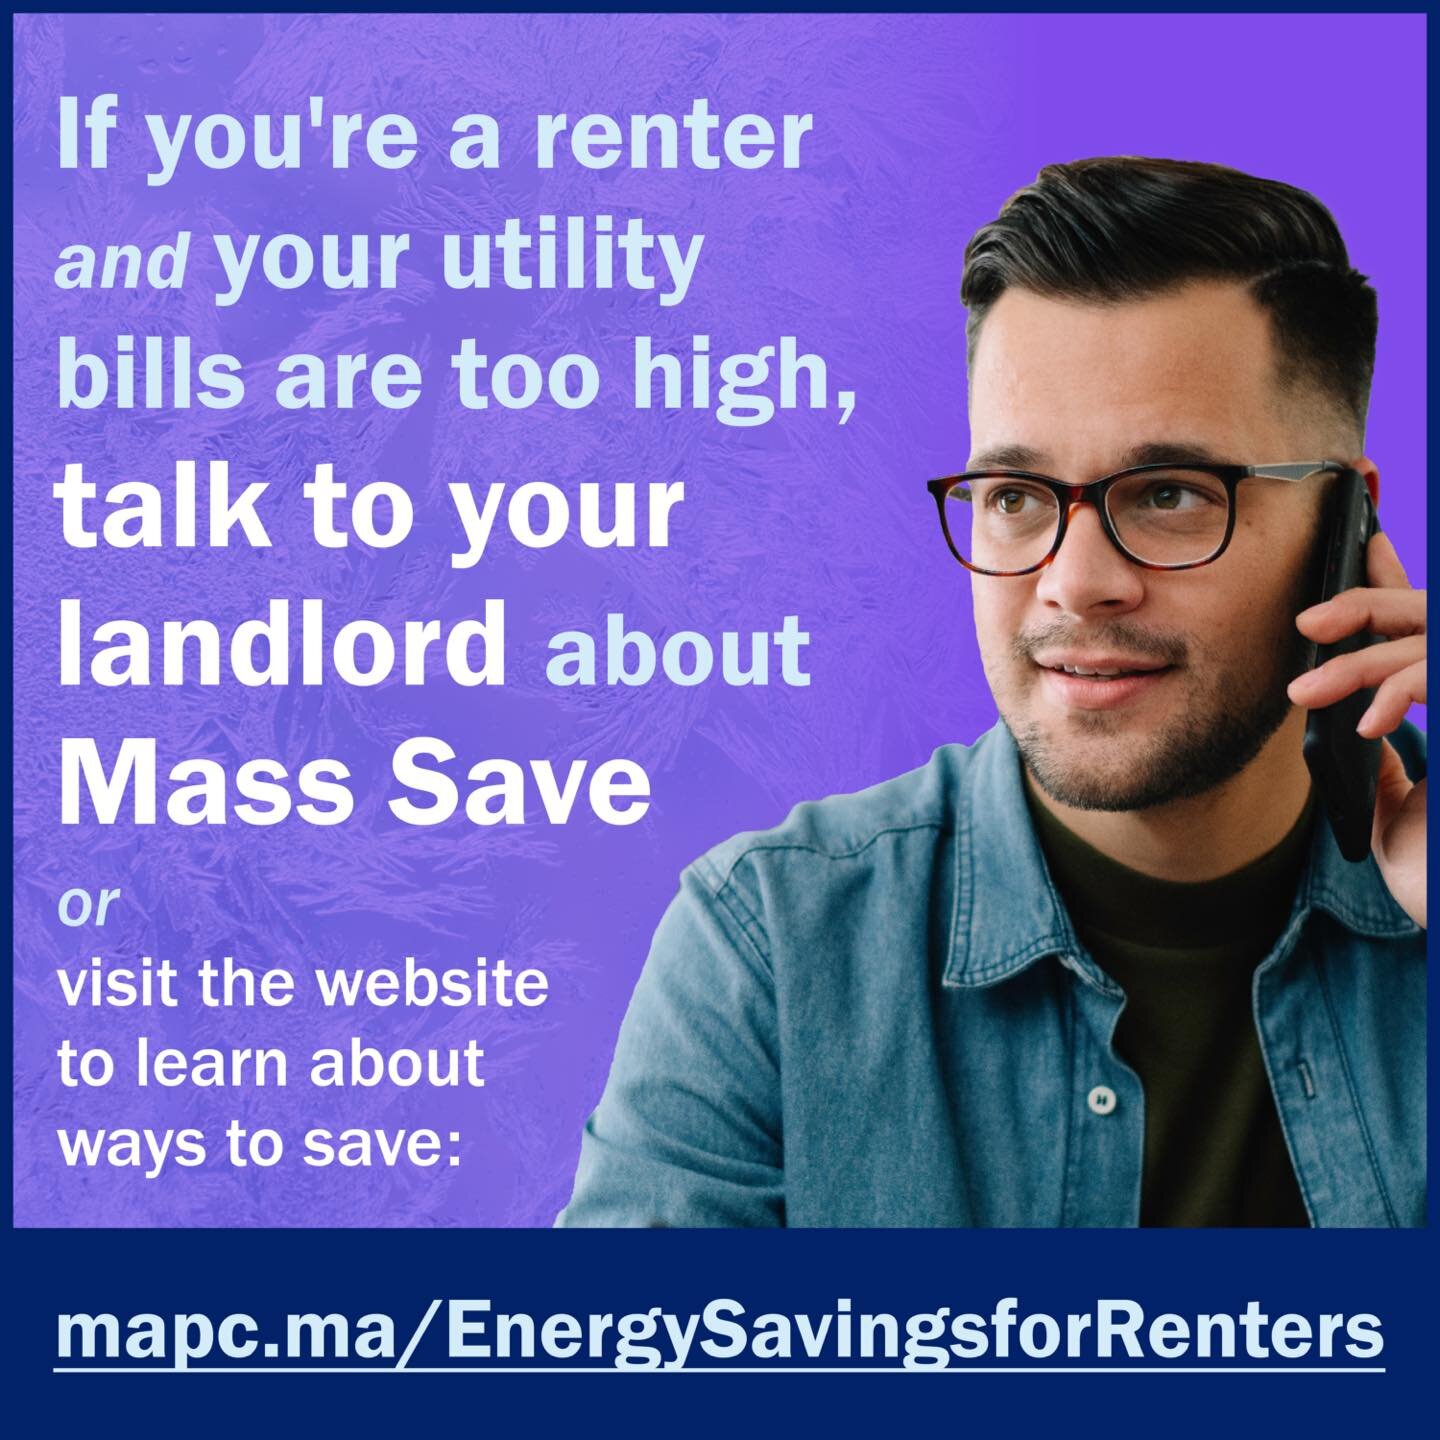 If you're a renter and your utility bills are too high, talk to your landlord about Mass Save or visit their website to learn about ways to save: mapc.ma/EnergySavingsforRenters.